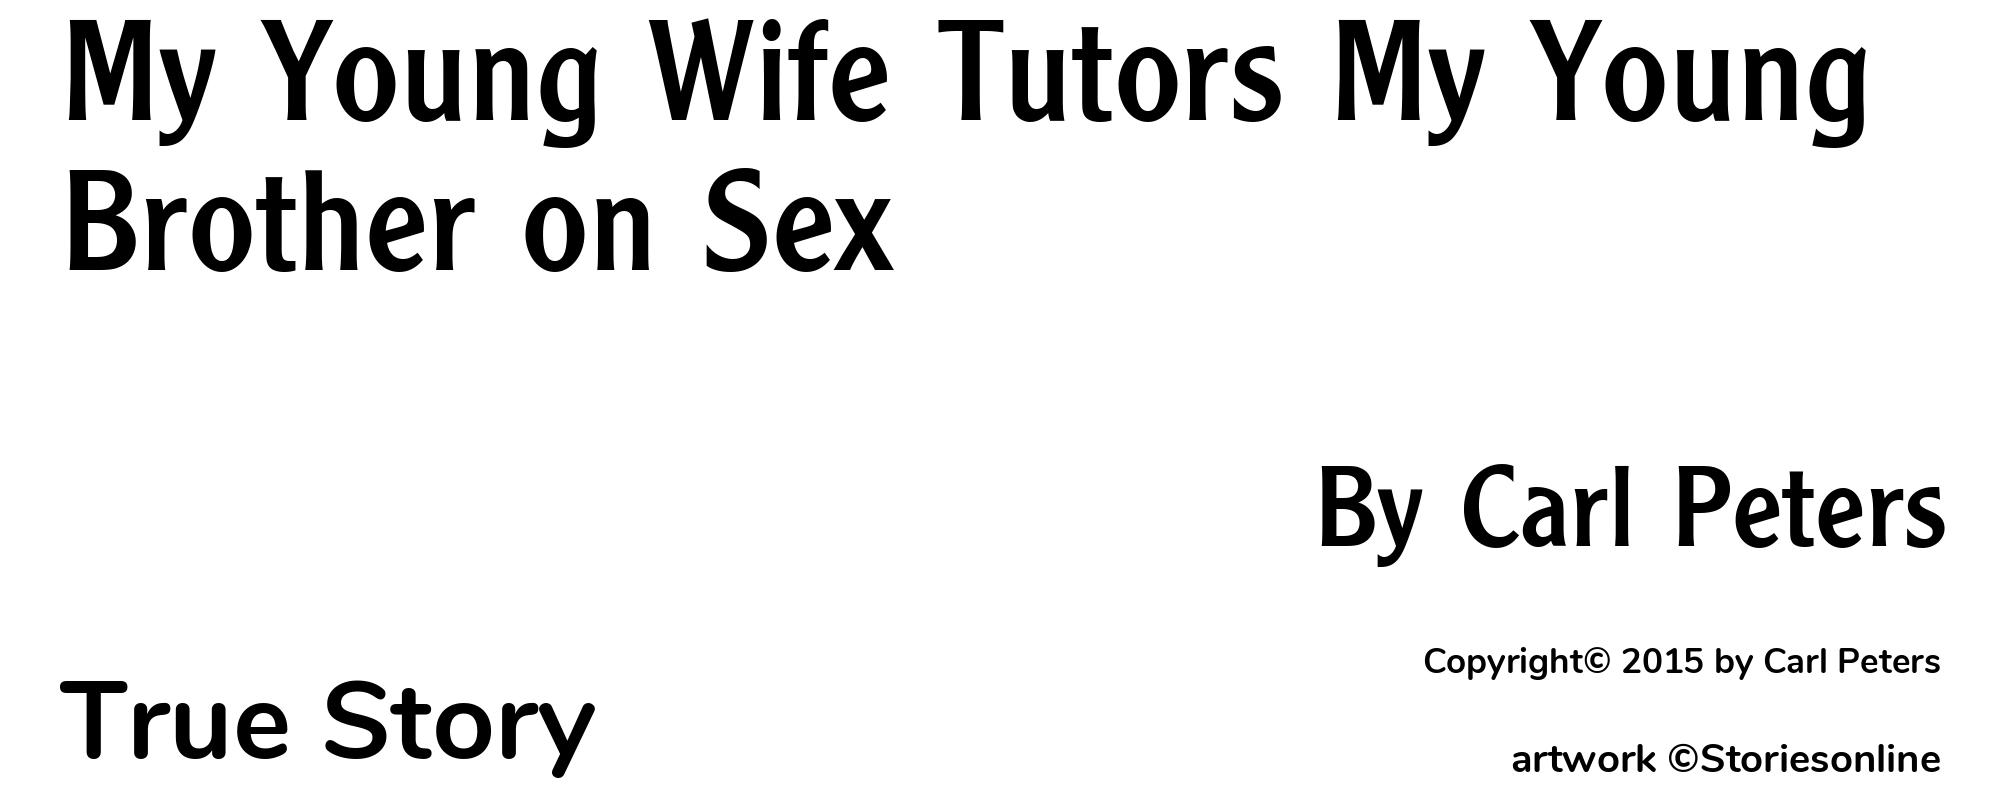 My Young Wife Tutors My Young Brother on Sex - Cover